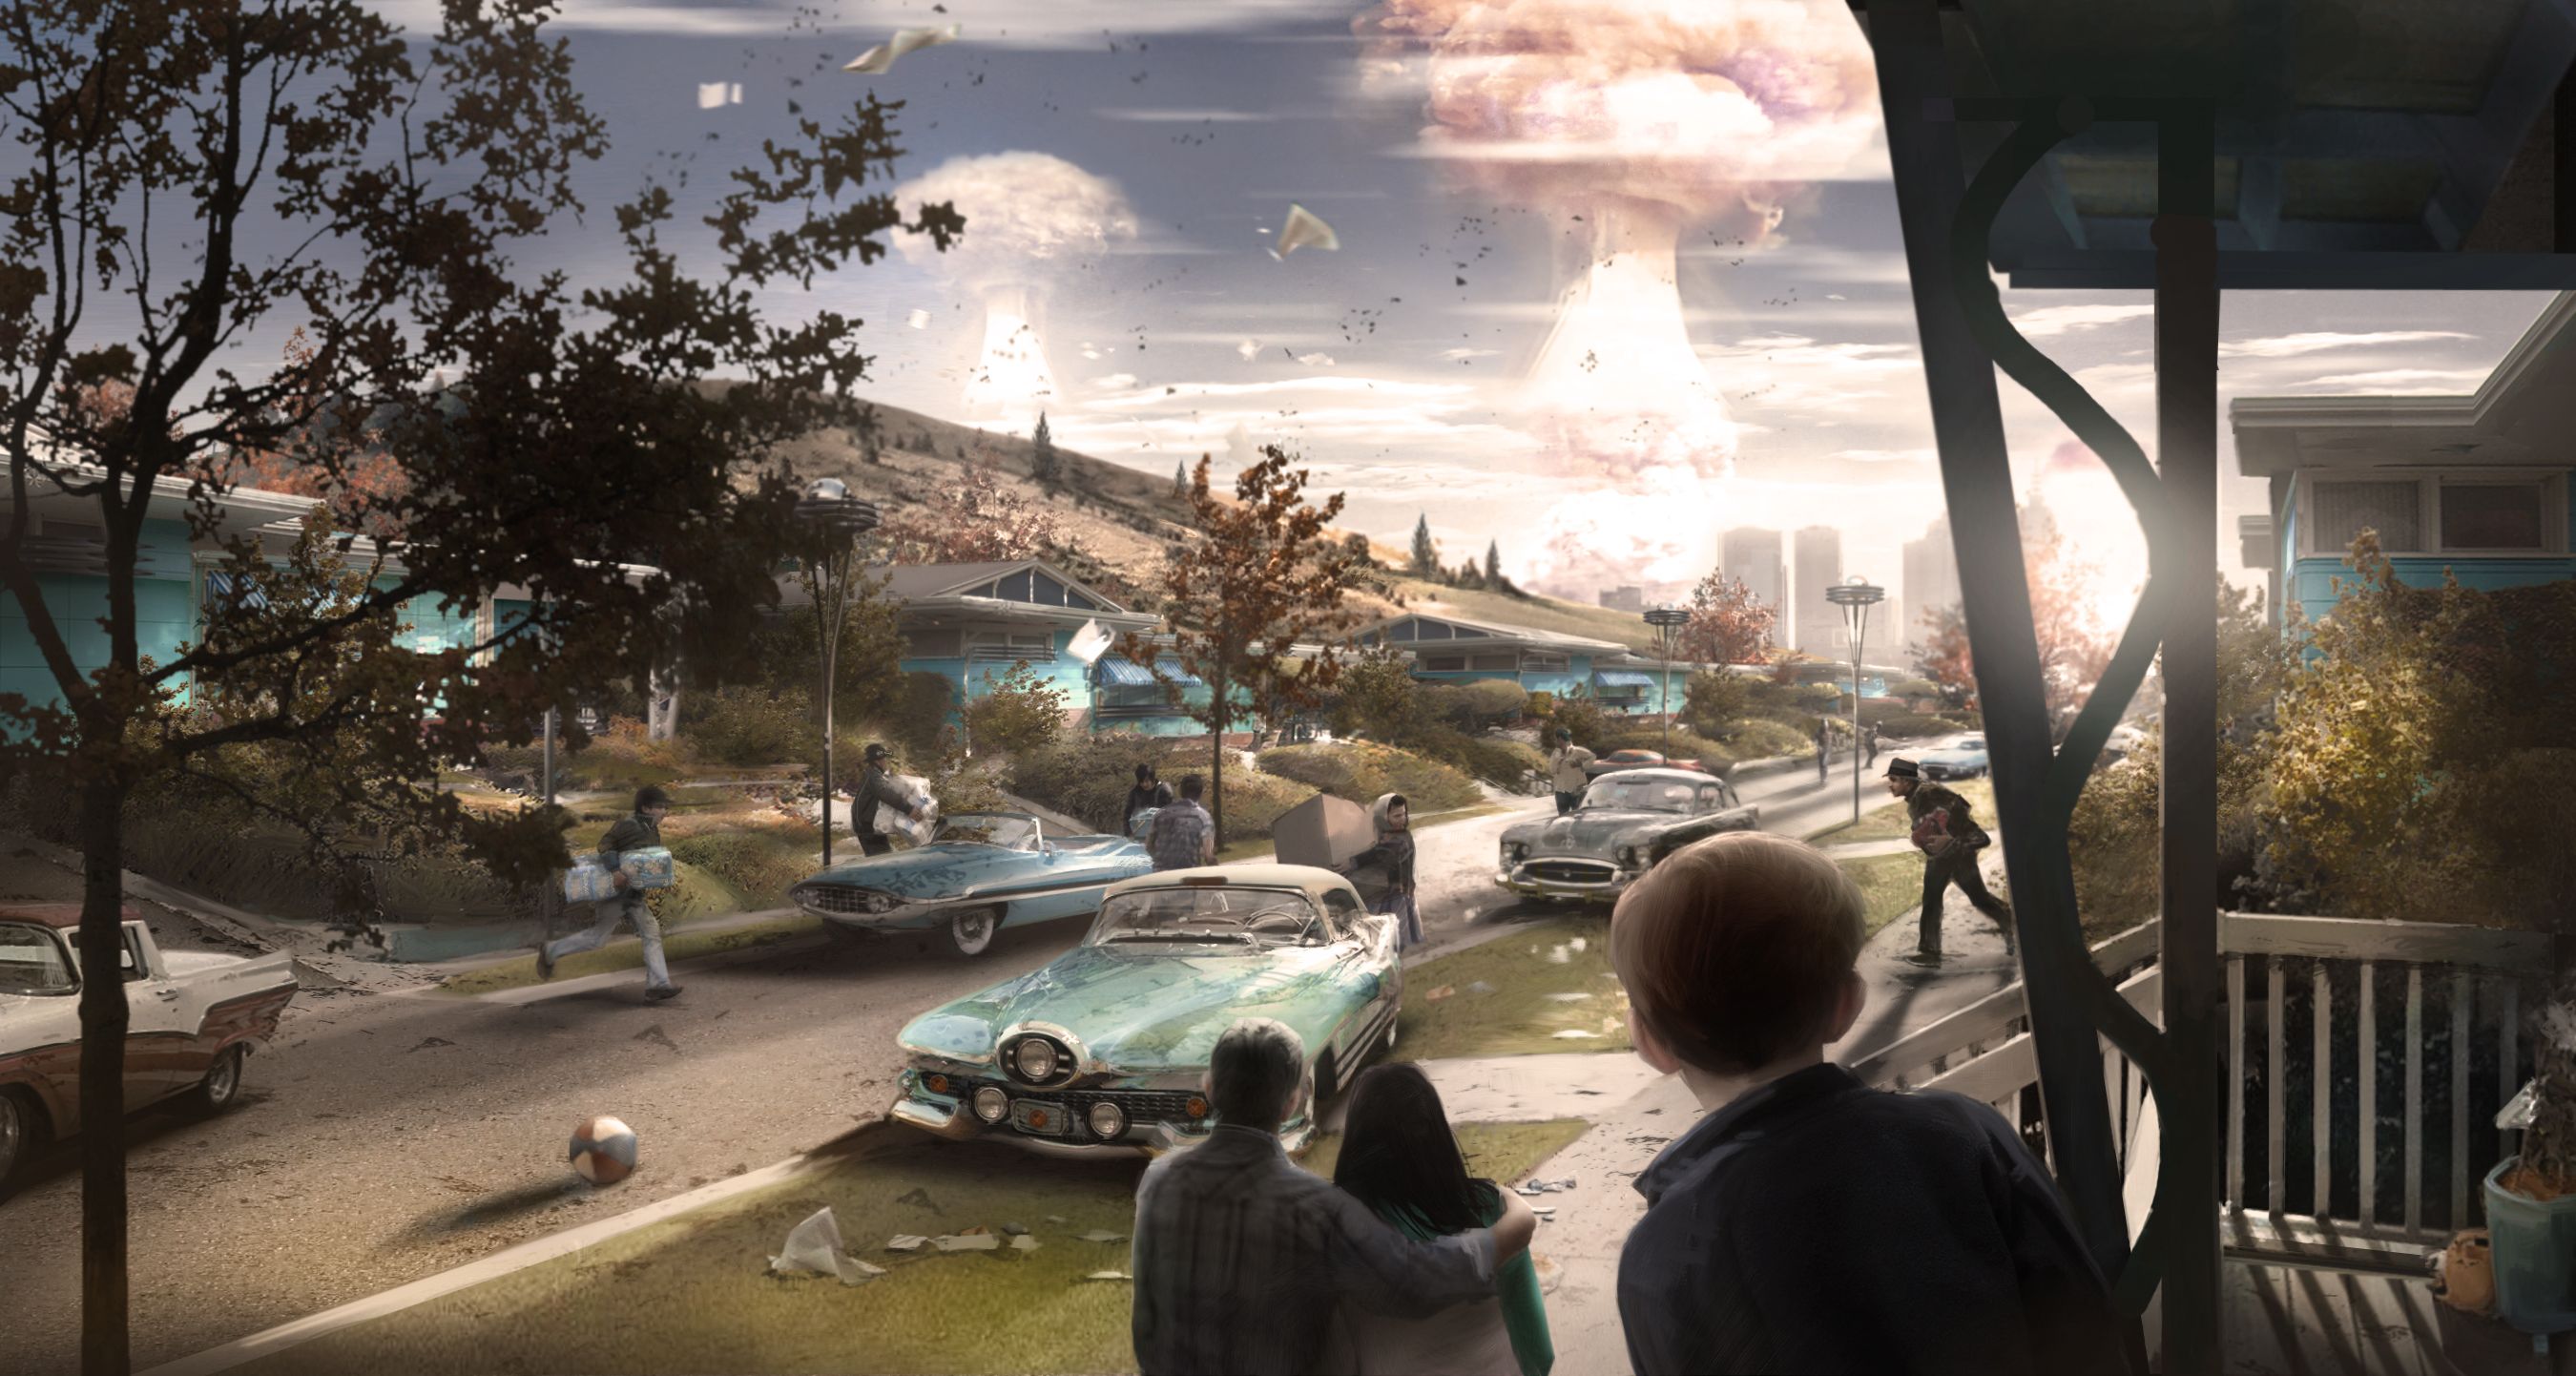 Fallout S Concept Art Is Wallpaper Worthy Polygon